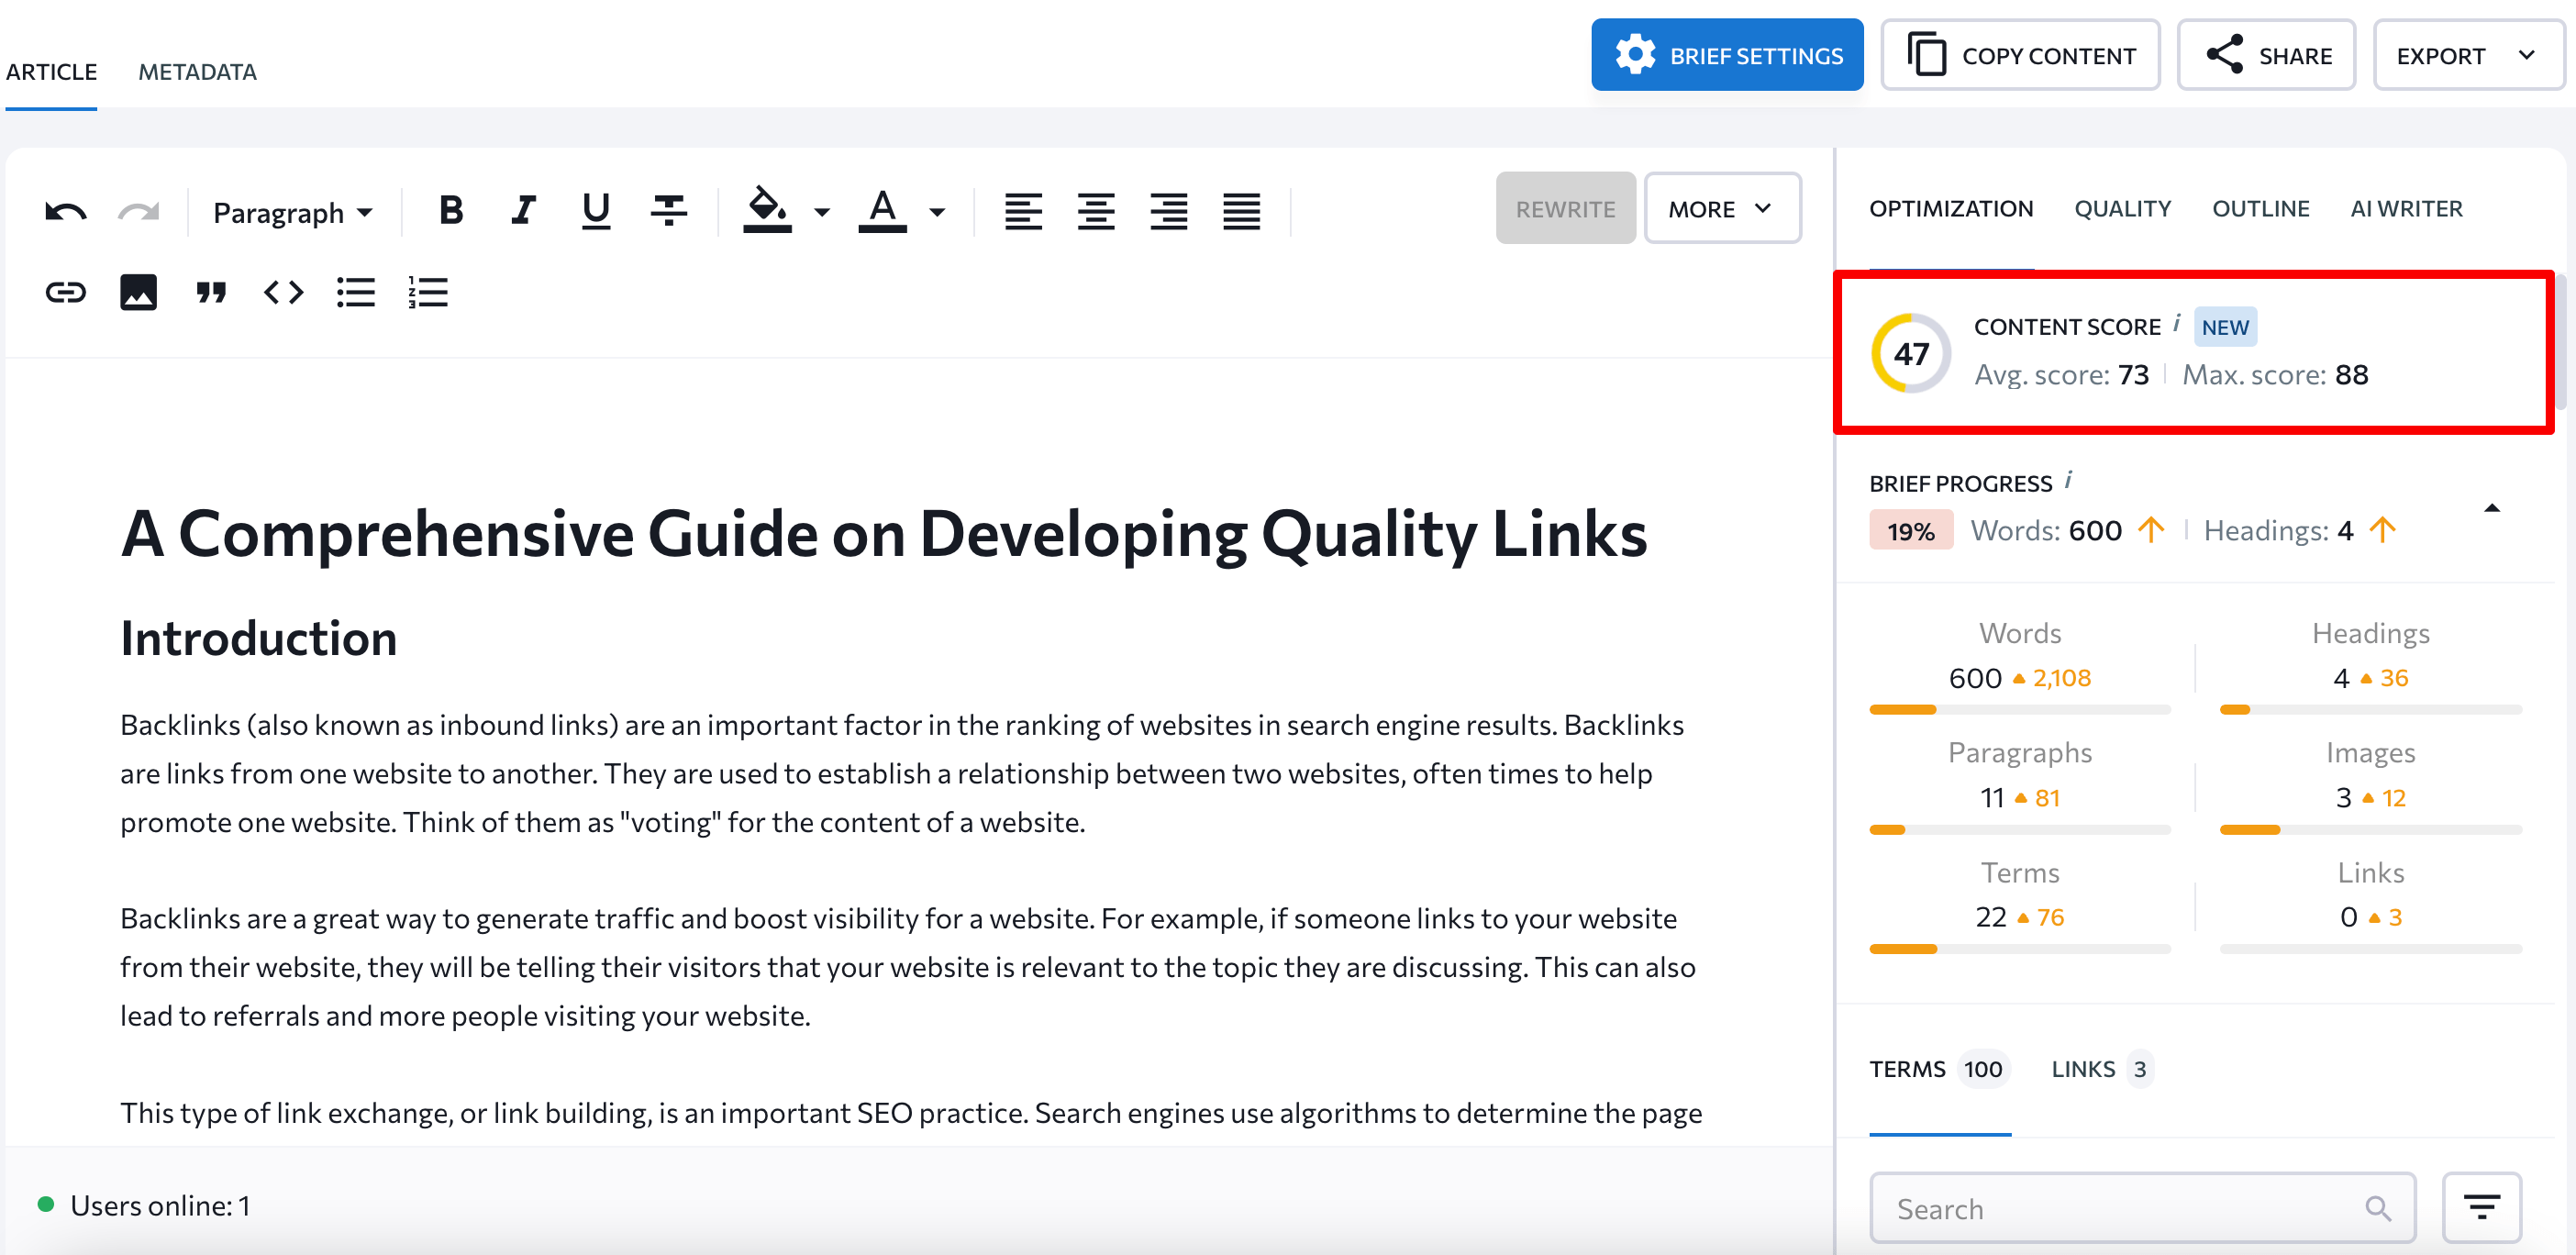 Content Score feature in SE Ranking's Content Editor